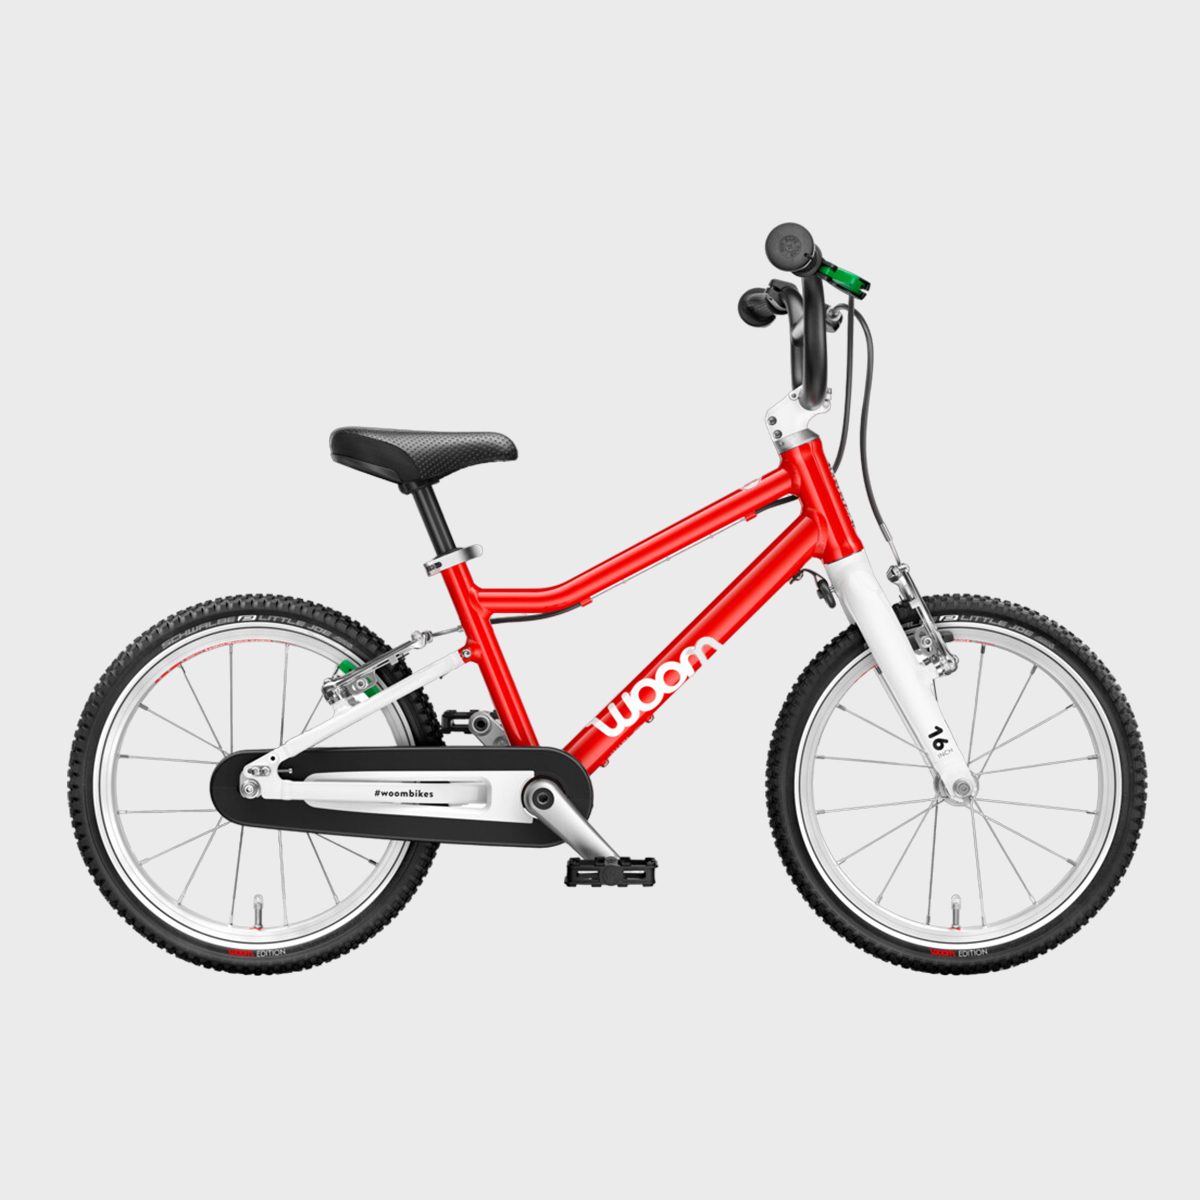 <p>When you're a kid, there's nothing quite like a shiny new bicycle. And they'll especially love riding this super <a href="https://woom.com/en_US/products/woom-3-kids-bike" rel="noopener noreferrer">lightweight bike</a> around the neighborhood that's been intentionally designed just for them. Woom</p> <p>Original bikes come in a range of colors and sizes for children aged between 18 months and 14 years, and they have a handy <a href="https://woom.com/en_US/bike-finder-quiz" rel="noopener noreferrer">bike finder quiz</a> to help you determine the best bike for your child. Once you've selected the perfect bike, be sure to add a <a href="https://woom.com/en_US/products/helmet" rel="noopener noreferrer">matching helmet</a> to protect those kissable little heads!</p> <p class="listicle-page__cta-button-shop"><a class="shop-btn" href="https://woom.com/en_US/products/woom-3-kids-bike">Shop Now</a></p>